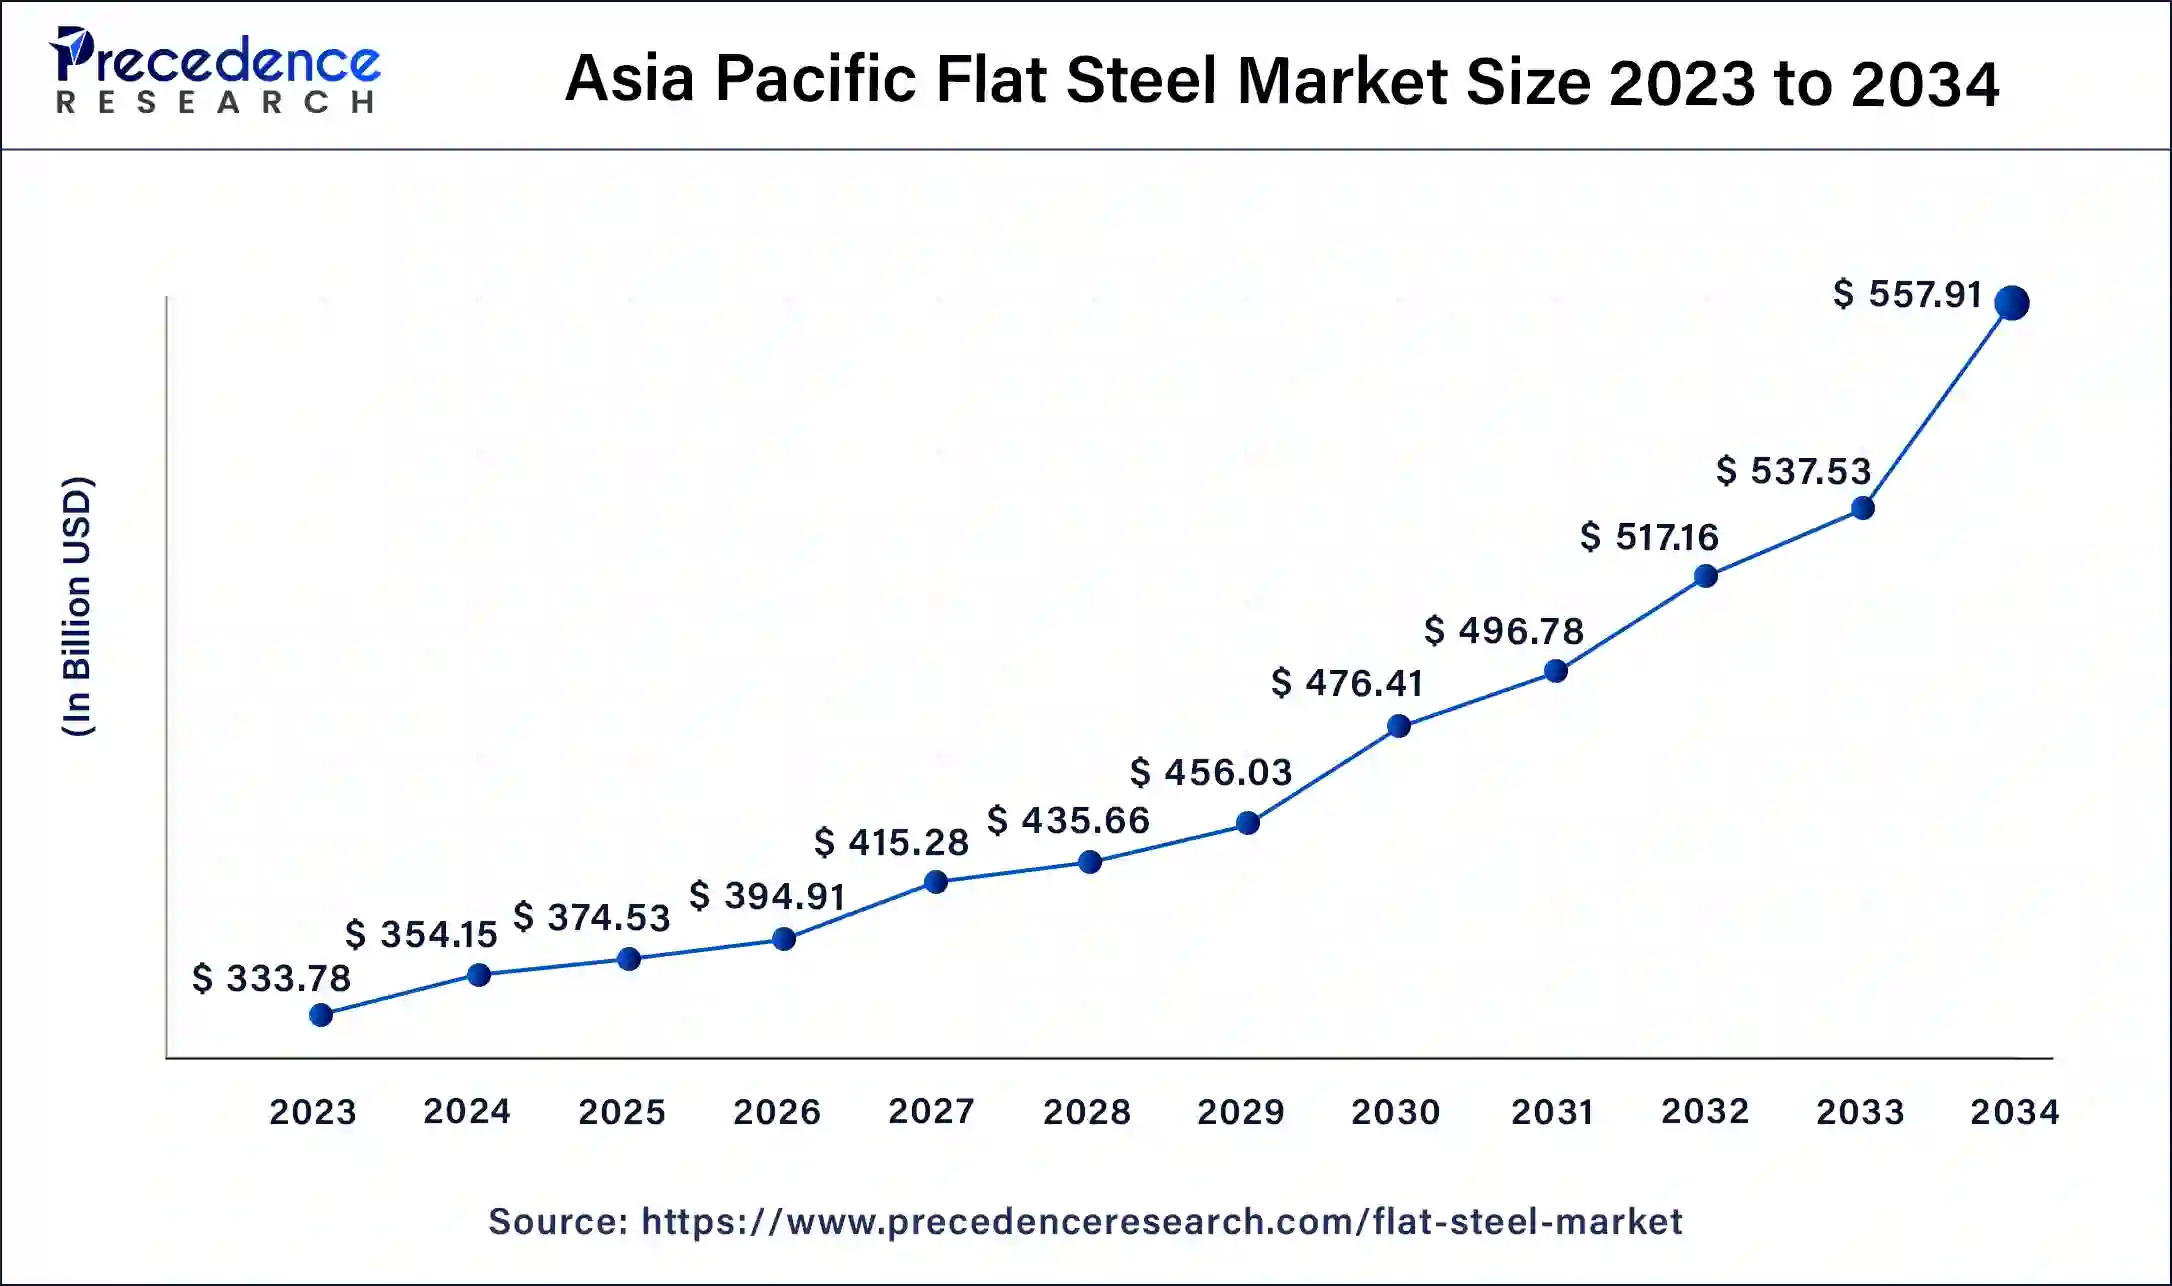 Asia Pacific Flat Steel Market Size 2024 To 2034